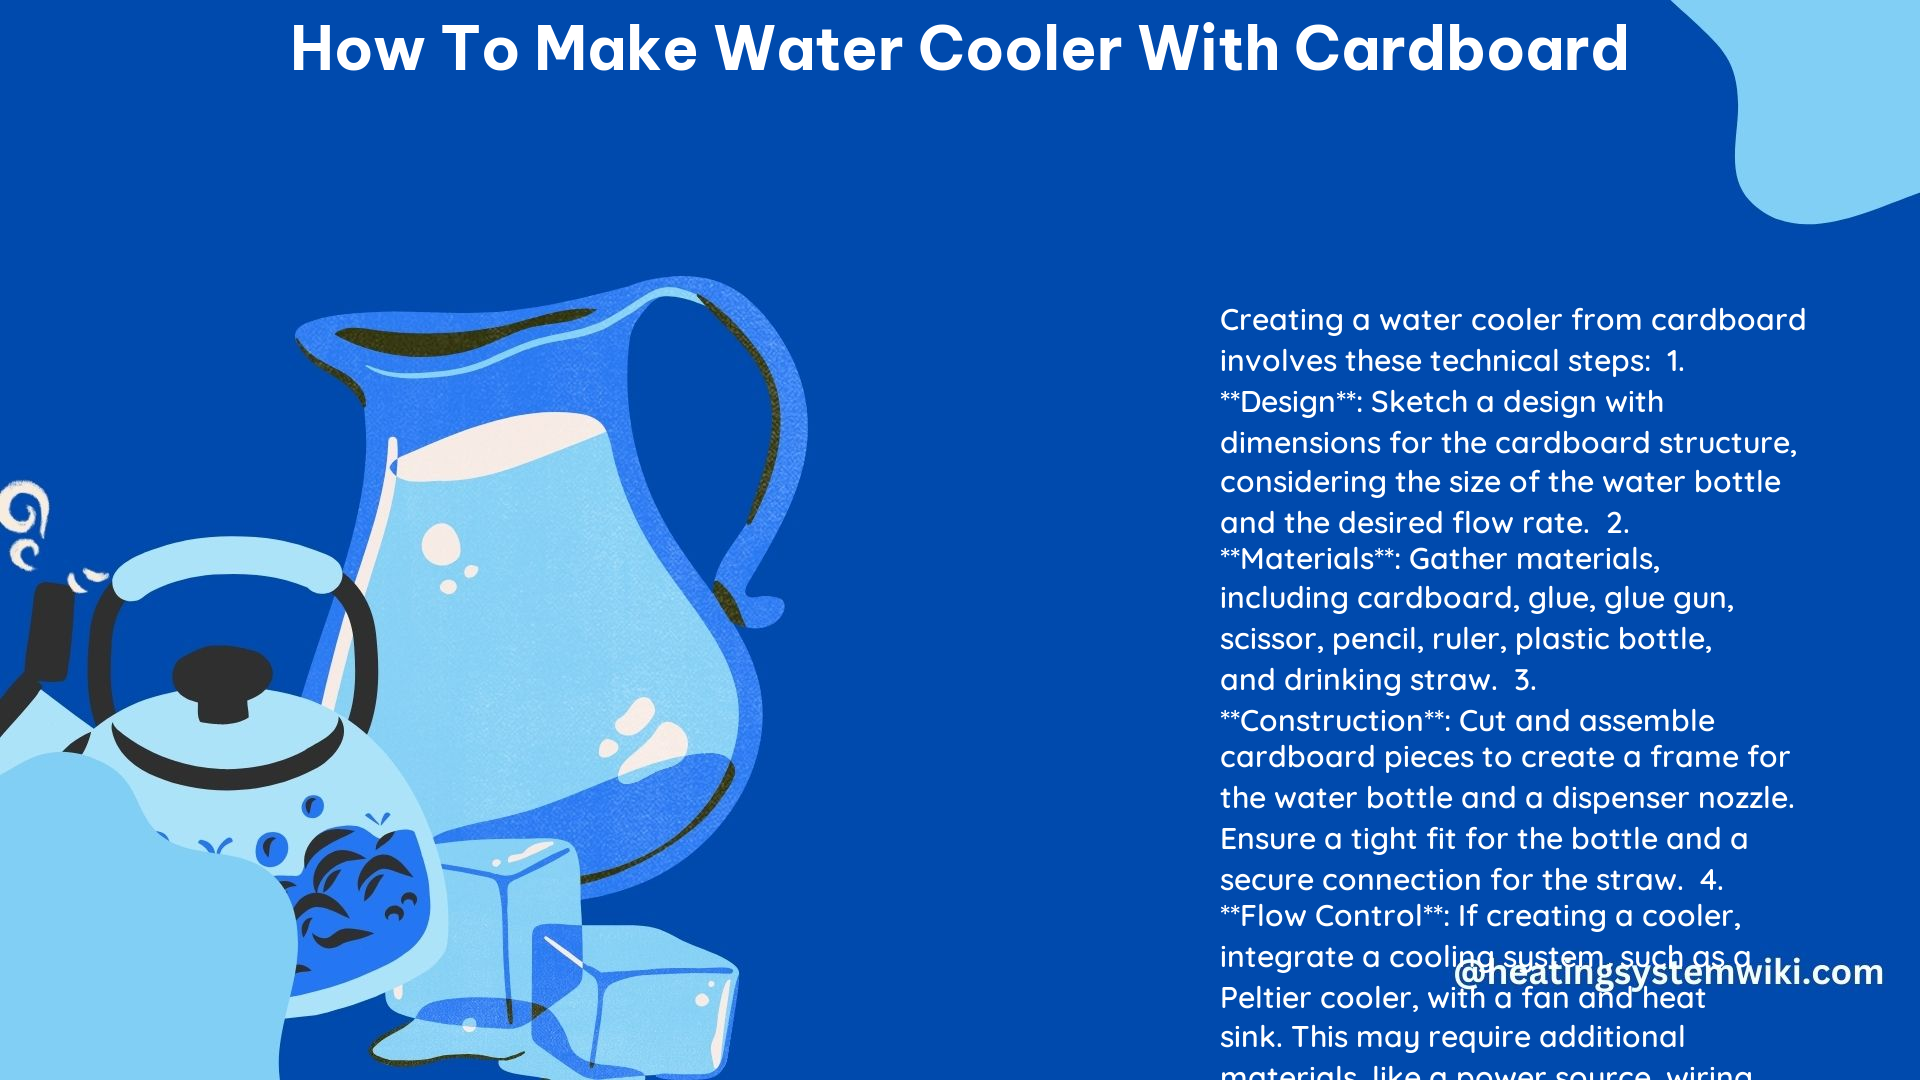 How to Make Water Cooler With Cardboard